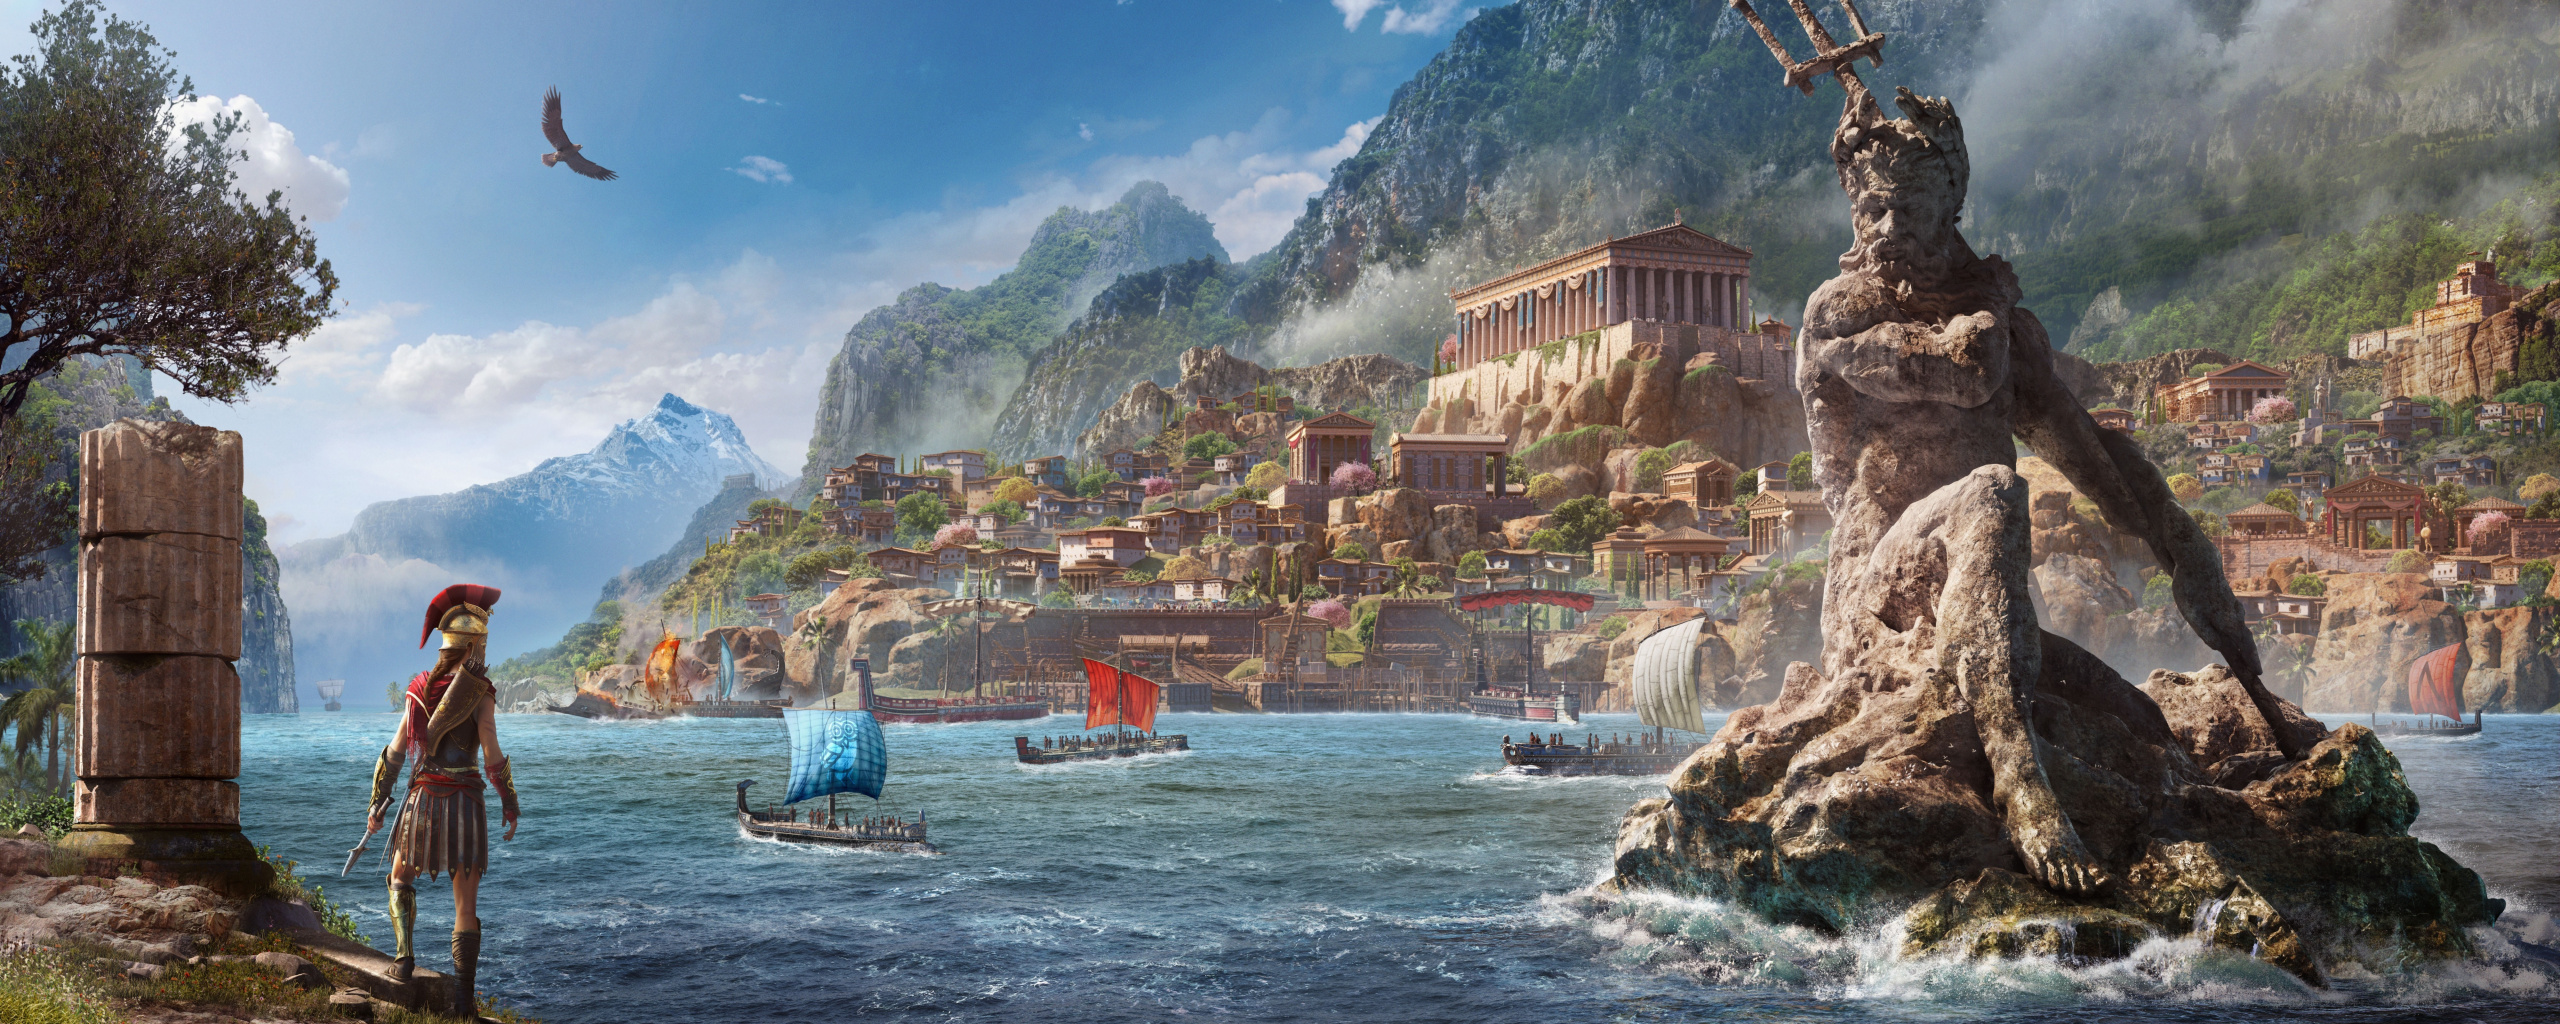 Wallpaper City, River Bank, Assassin's Creed Odyssey, Of